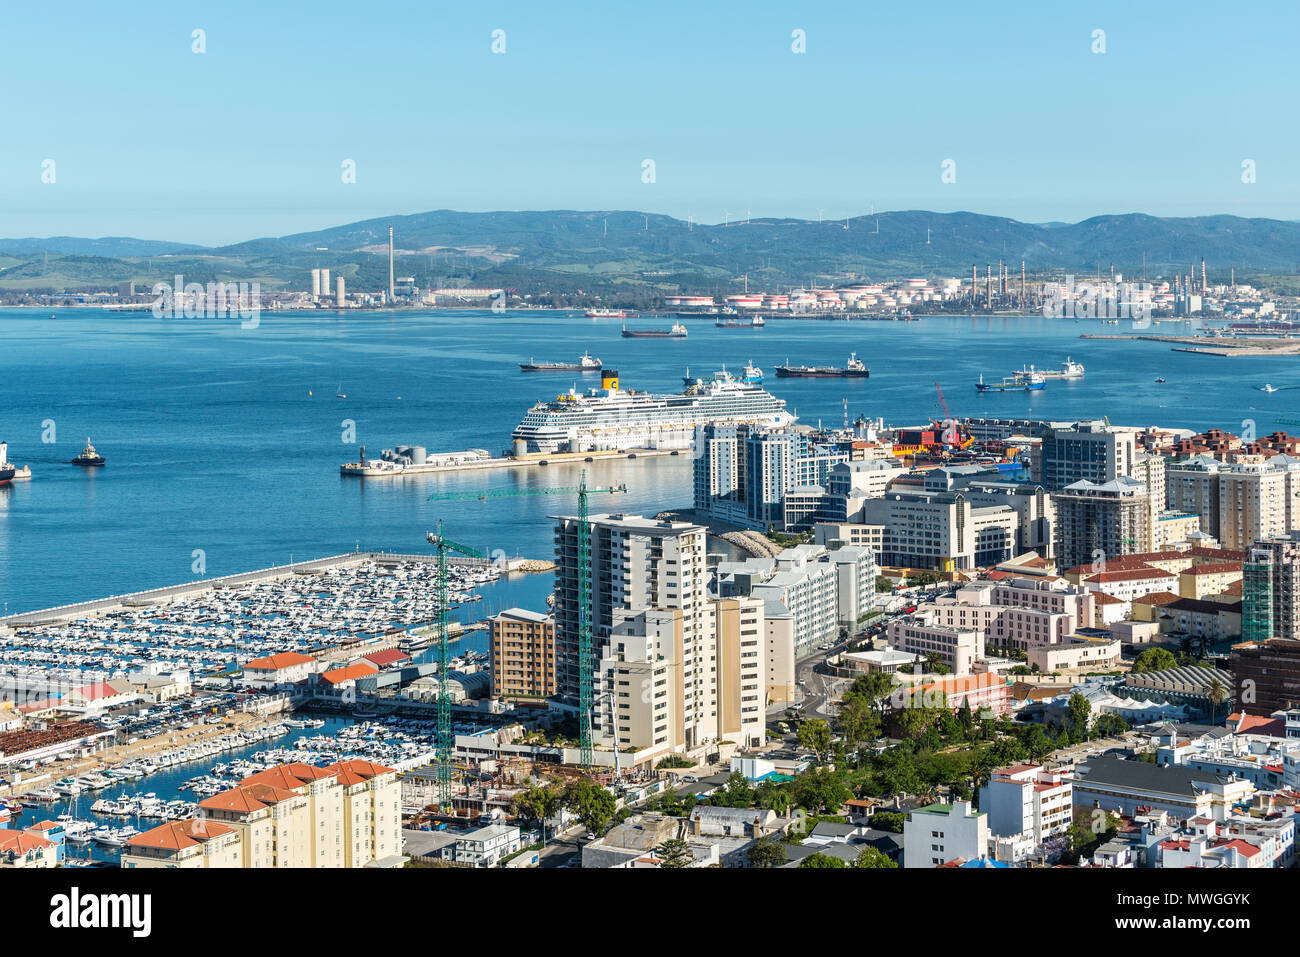 Gibraltar, UK - May 18, 2017: Aerial view of the Gibraltar harbor, seaport, ships in the Bay of Algeciras (coast of Spain). Stock Photo